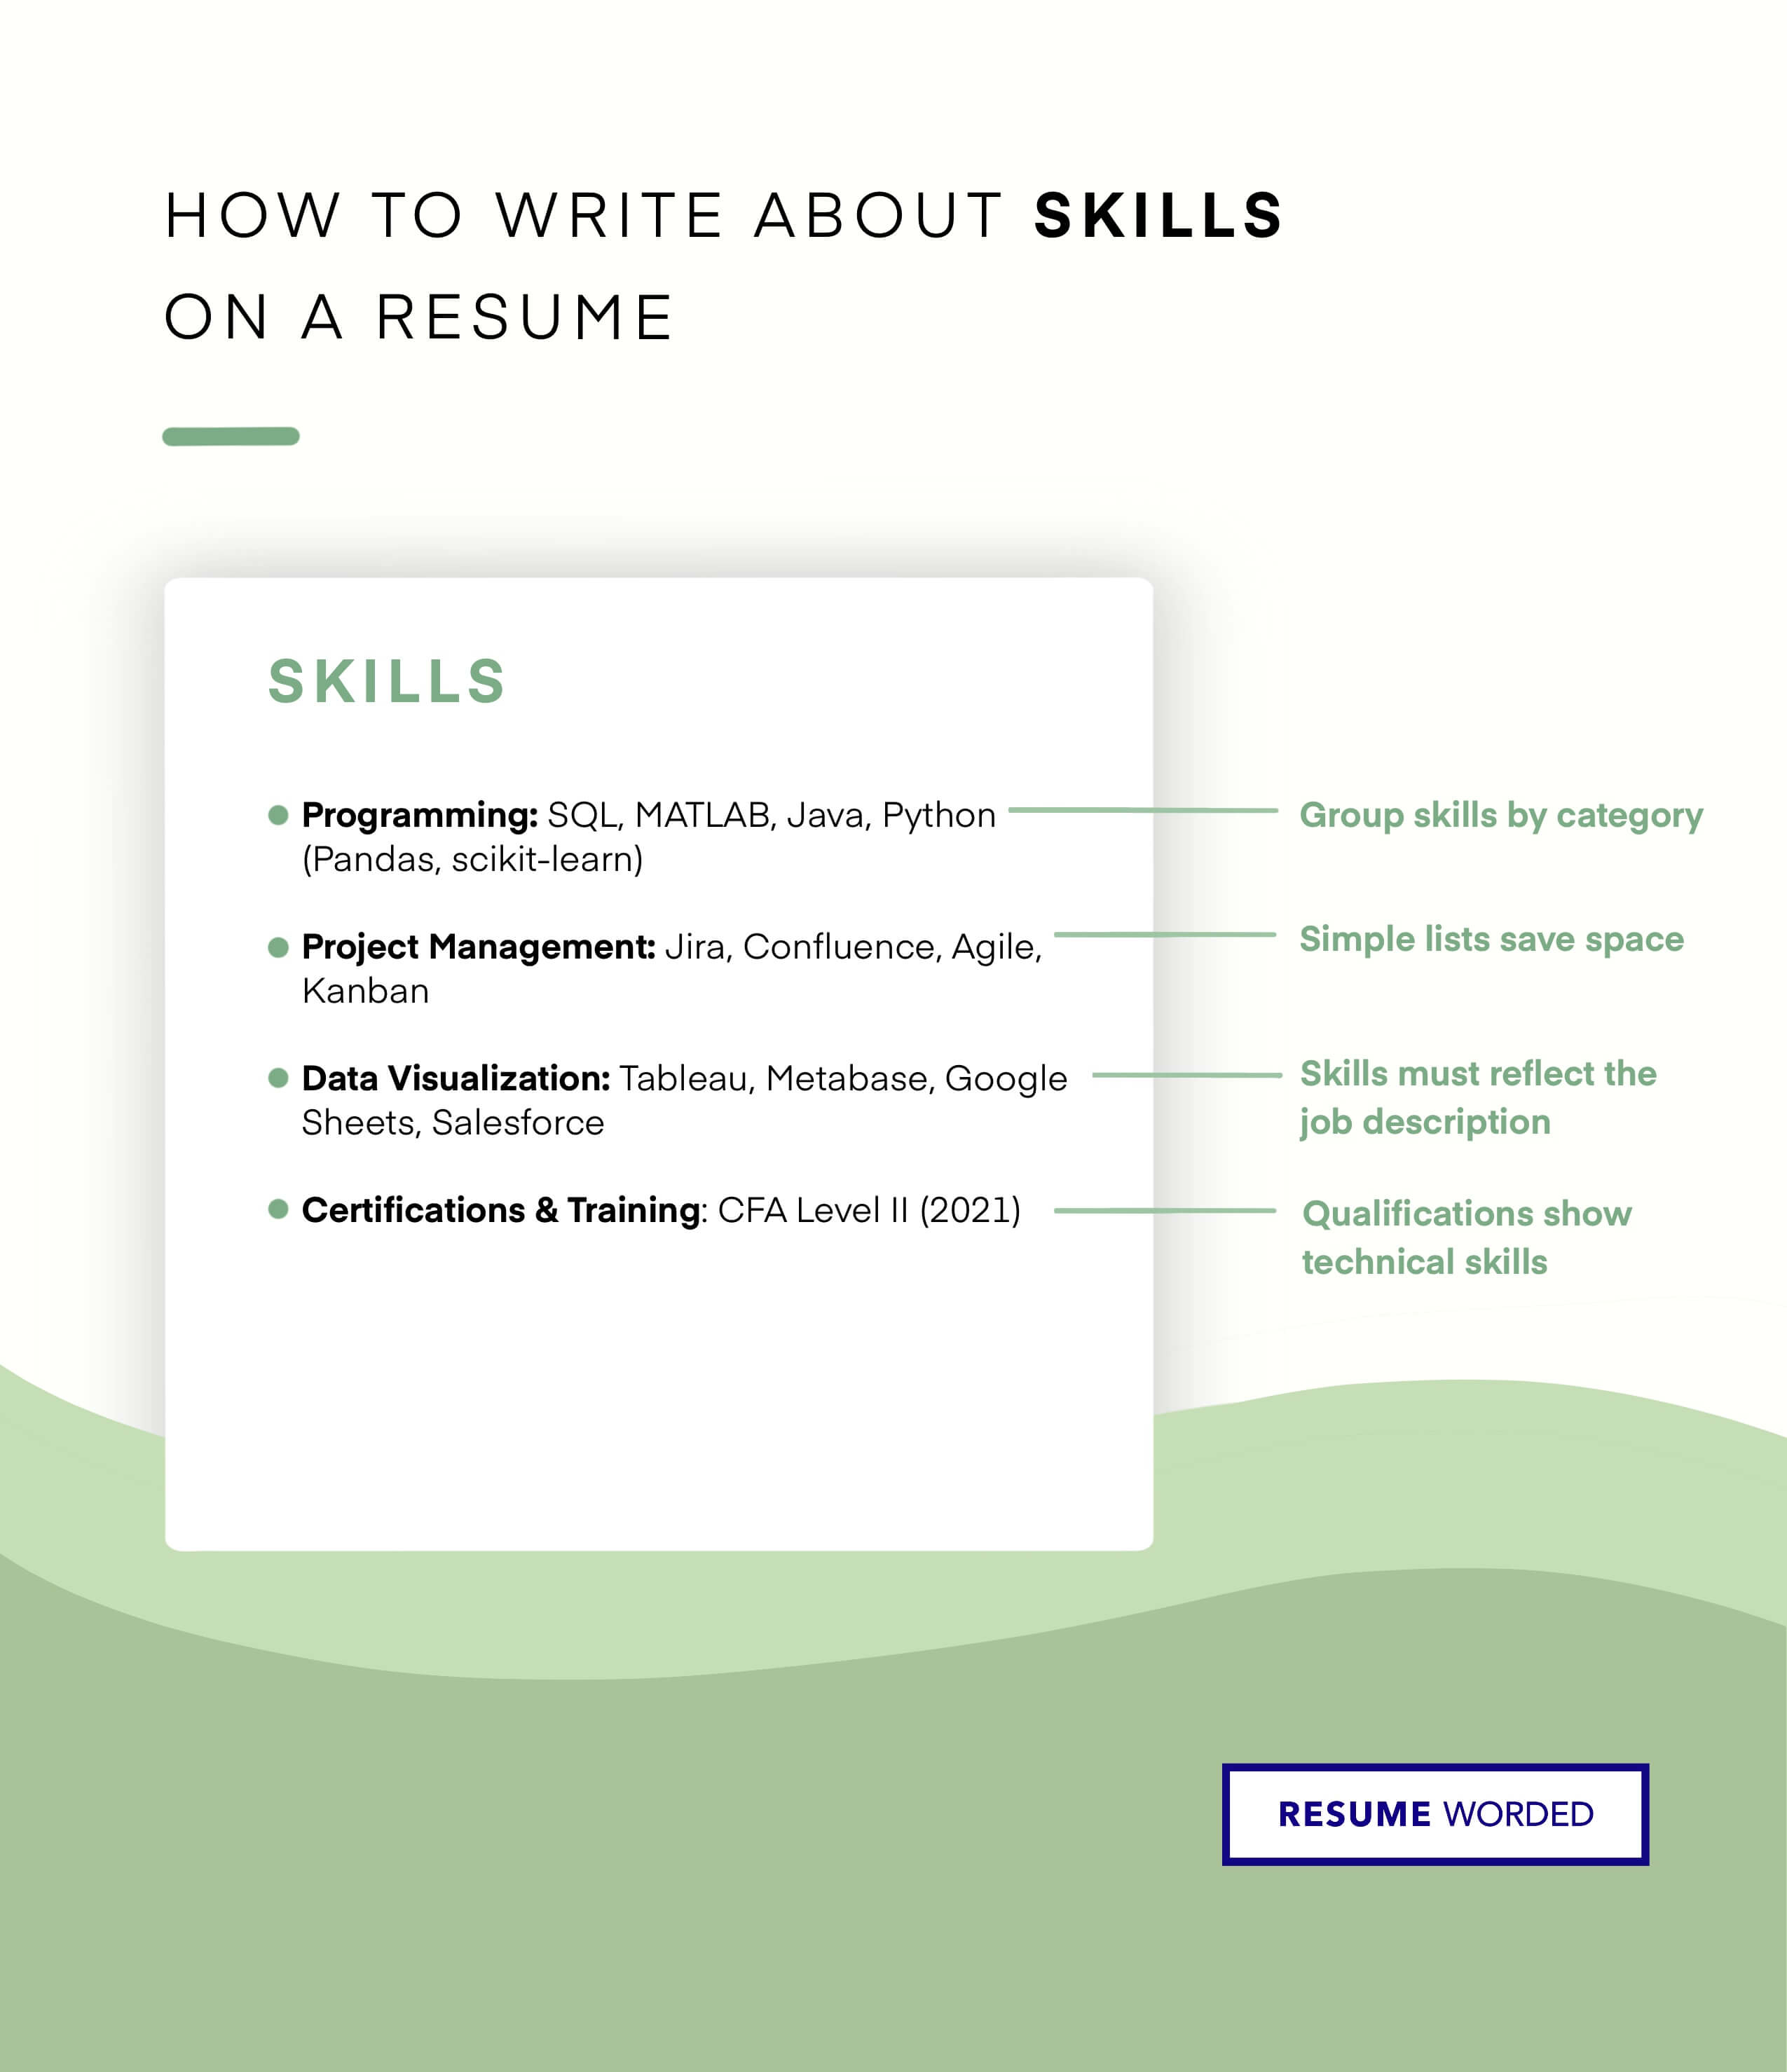 Include relevant keywords in the skills section.